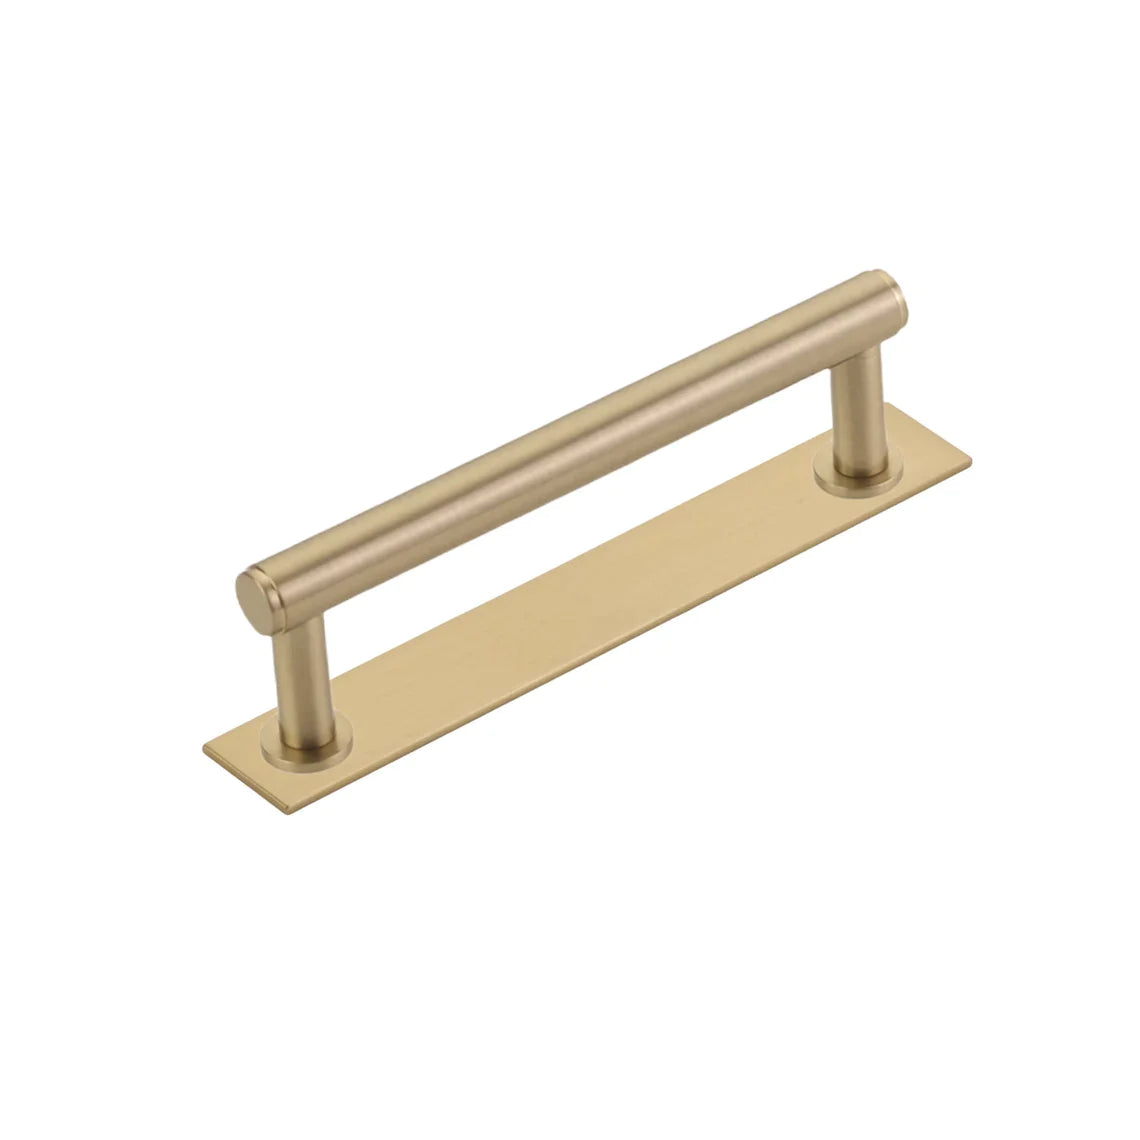 Satin Brass "Maison No. 2" Smooth Drawer Pulls and Cabinet Knobs with Optional Backplate - Forge Hardware Studio